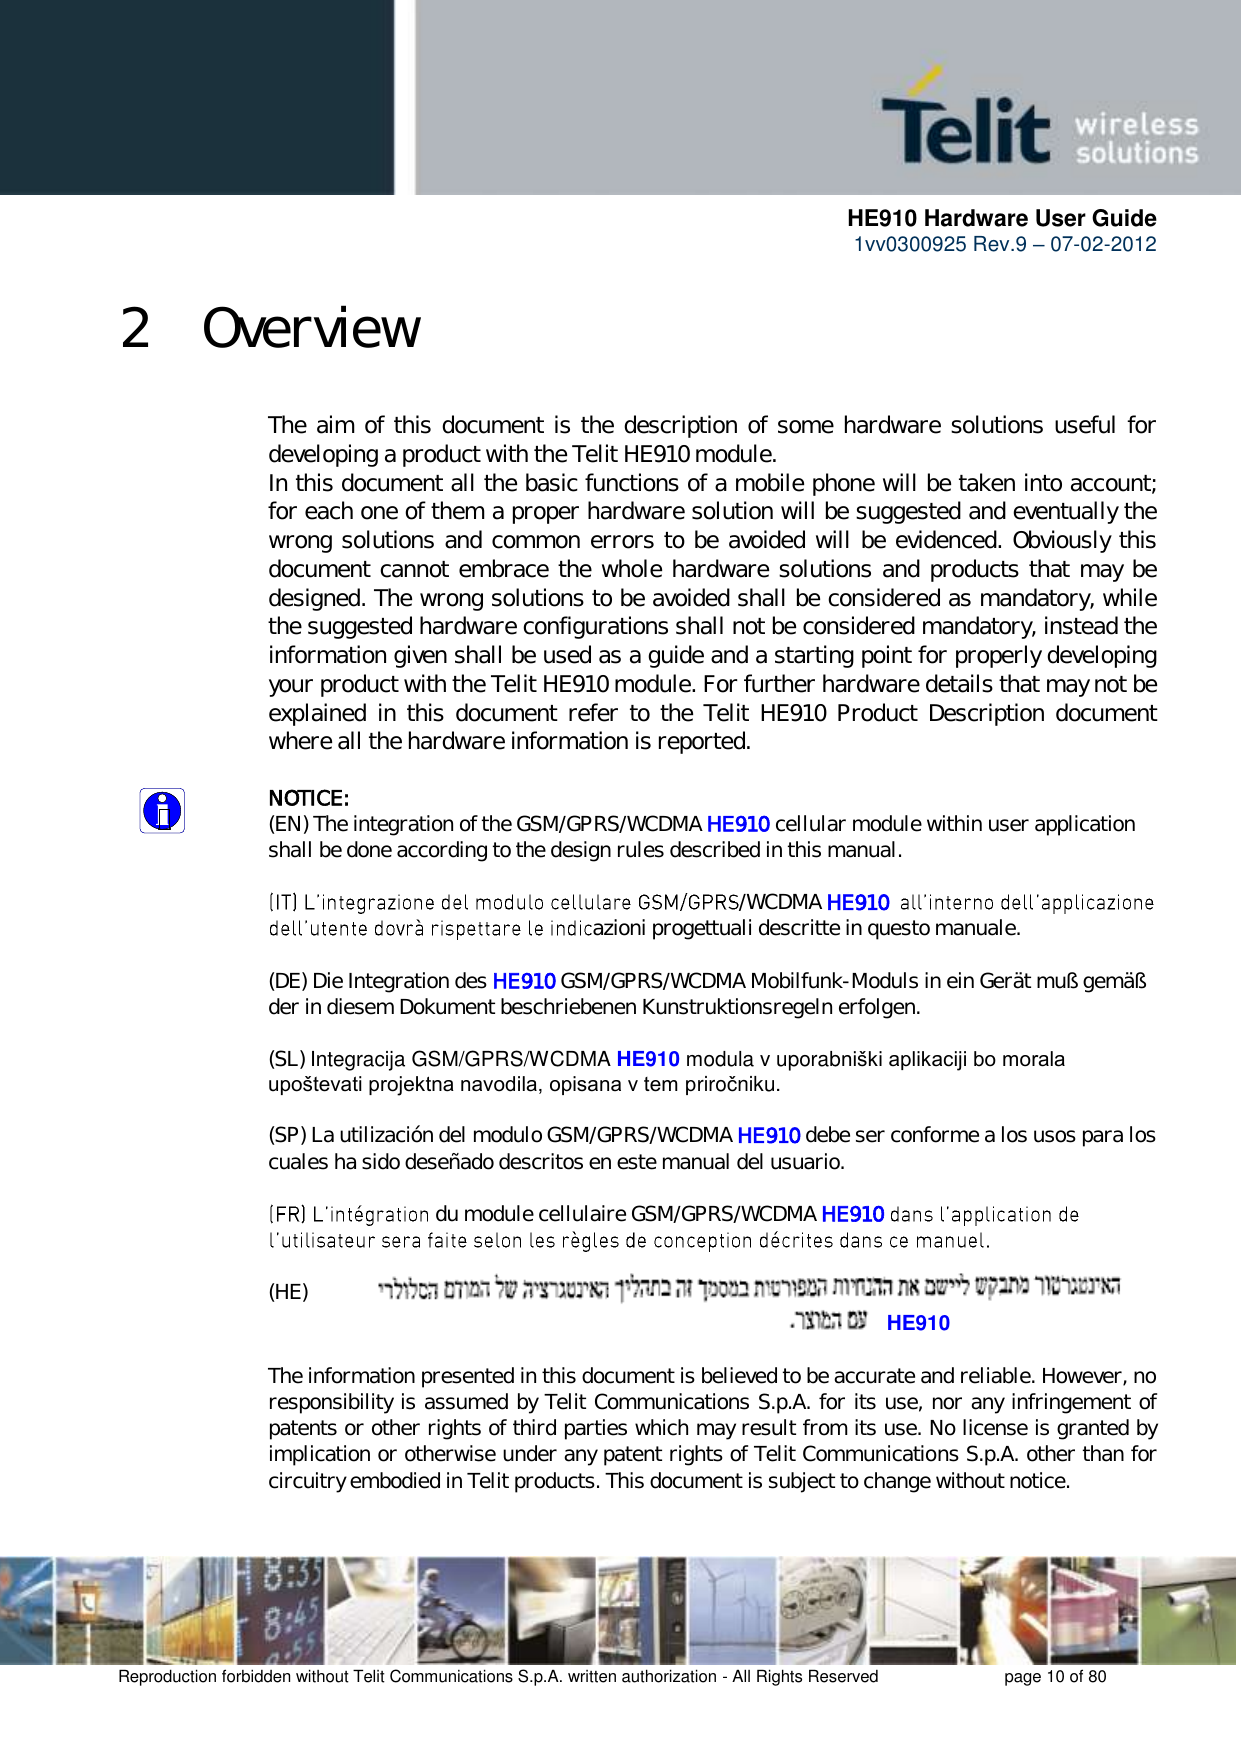      HE910 Hardware User Guide 1vv0300925 Rev.9 – 07-02-2012    Reproduction forbidden without Telit Communications S.p.A. written authorization - All Rights Reserved    page 10 of 80  2 Overview The aim of this document is the description of some hardware solutions useful for developing a product with the Telit HE910 module. In this document all the basic functions of a mobile phone will be taken into account; for each one of them a proper hardware solution will be suggested and eventually the wrong solutions and common errors to be avoided will be evidenced. Obviously this document cannot embrace the whole hardware solutions and products that may be designed. The wrong solutions to be avoided shall be considered as mandatory, while the suggested hardware configurations shall not be considered mandatory, instead the information given shall be used as a guide and a starting point for properly developing your product with the Telit HE910 module. For further hardware details that may not be explained  in  this  document refer  to the  Telit  HE910  Product  Description  document where all the hardware information is reported.  NOTICE: (EN) The integration of the GSM/GPRS/WCDMA HE910 cellular module within user application shall be done according to the design rules described in this manual.  /WCDMA HE910  azioni progettuali descritte in questo manuale.  (DE) Die Integration des HE910 GSM/GPRS/WCDMA Mobilfunk-Moduls in ein Gerät muß gemäß der in diesem Dokument beschriebenen Kunstruktionsregeln erfolgen.  (SL) Integracija GSM/GPRS/WCDMA HE910 modula v uporabniški aplikaciji bo morala upoštevati projektna navodila, opisana v tem priročniku.  (SP) La utilización del modulo GSM/GPRS/WCDMA HE910 debe ser conforme a los usos para los cuales ha sido deseñado descritos en este manual del usuario.   du module cellulaire GSM/GPRS/WCDMA HE910    (HE)   The information presented in this document is believed to be accurate and reliable. However, no responsibility is assumed by Telit Communications S.p.A. for its use, nor any infringement of patents or other rights of third parties which may result from its use. No license is granted by implication or otherwise under any patent rights of Telit Communications S.p.A. other than for circuitry embodied in Telit products. This document is subject to change without notice. HE910 